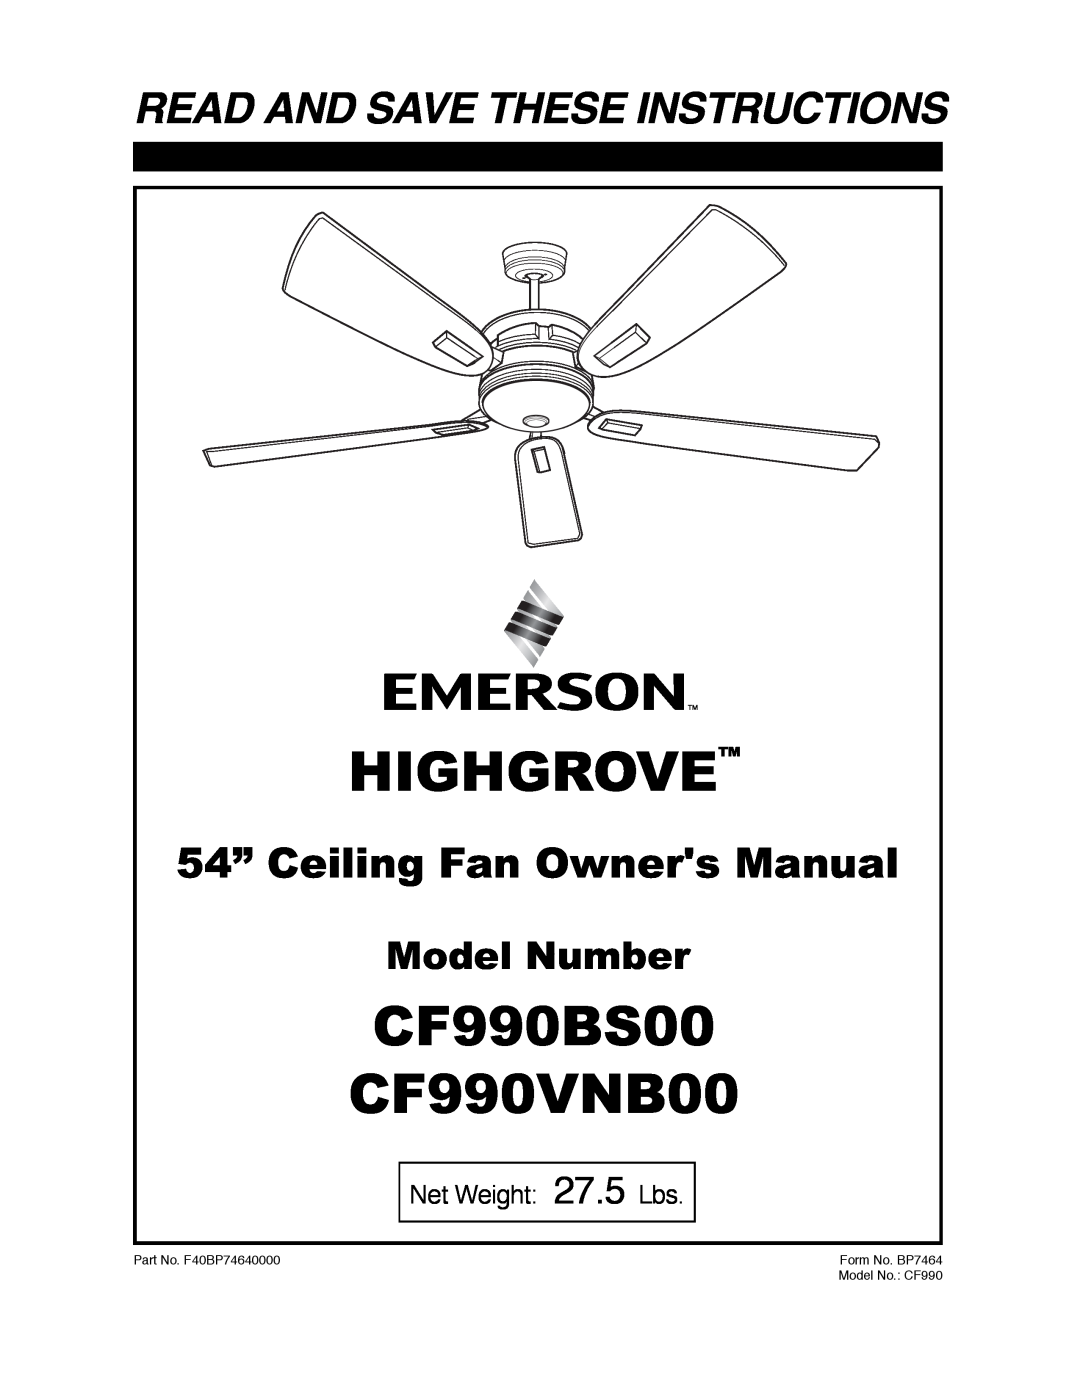 Emerson CF990VNB00 owner manual Net Weight 27.5 Lbs, Highgrove, CF990BS00, Read And Save These Instructions, Model Number 